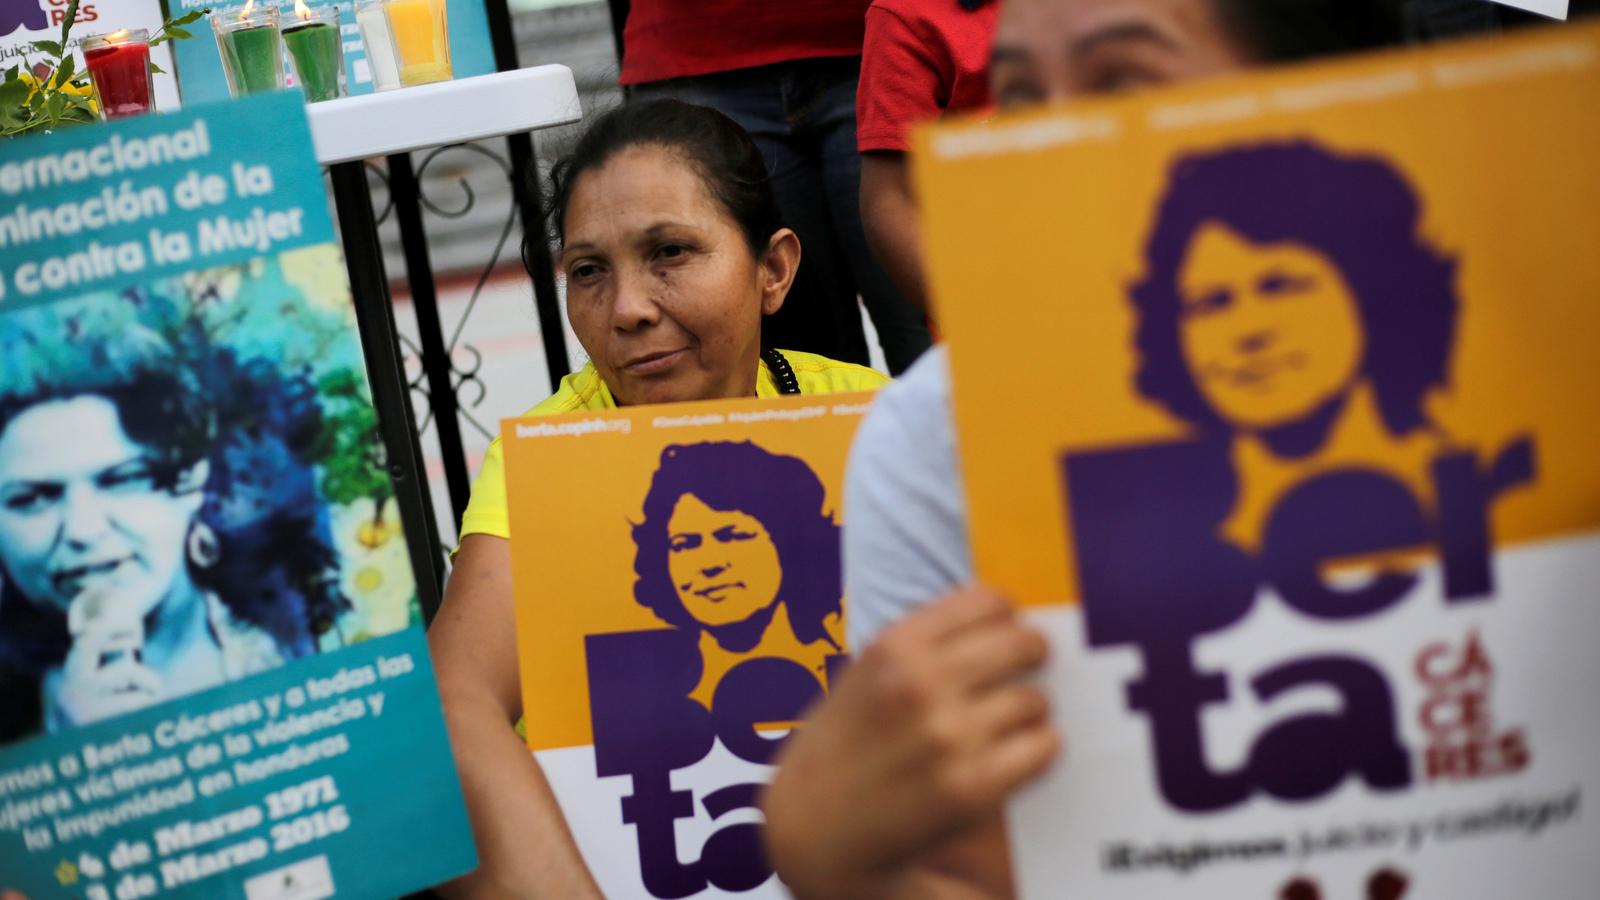 Demonstrators hold signs with Berta Cáceres' face outside a court.